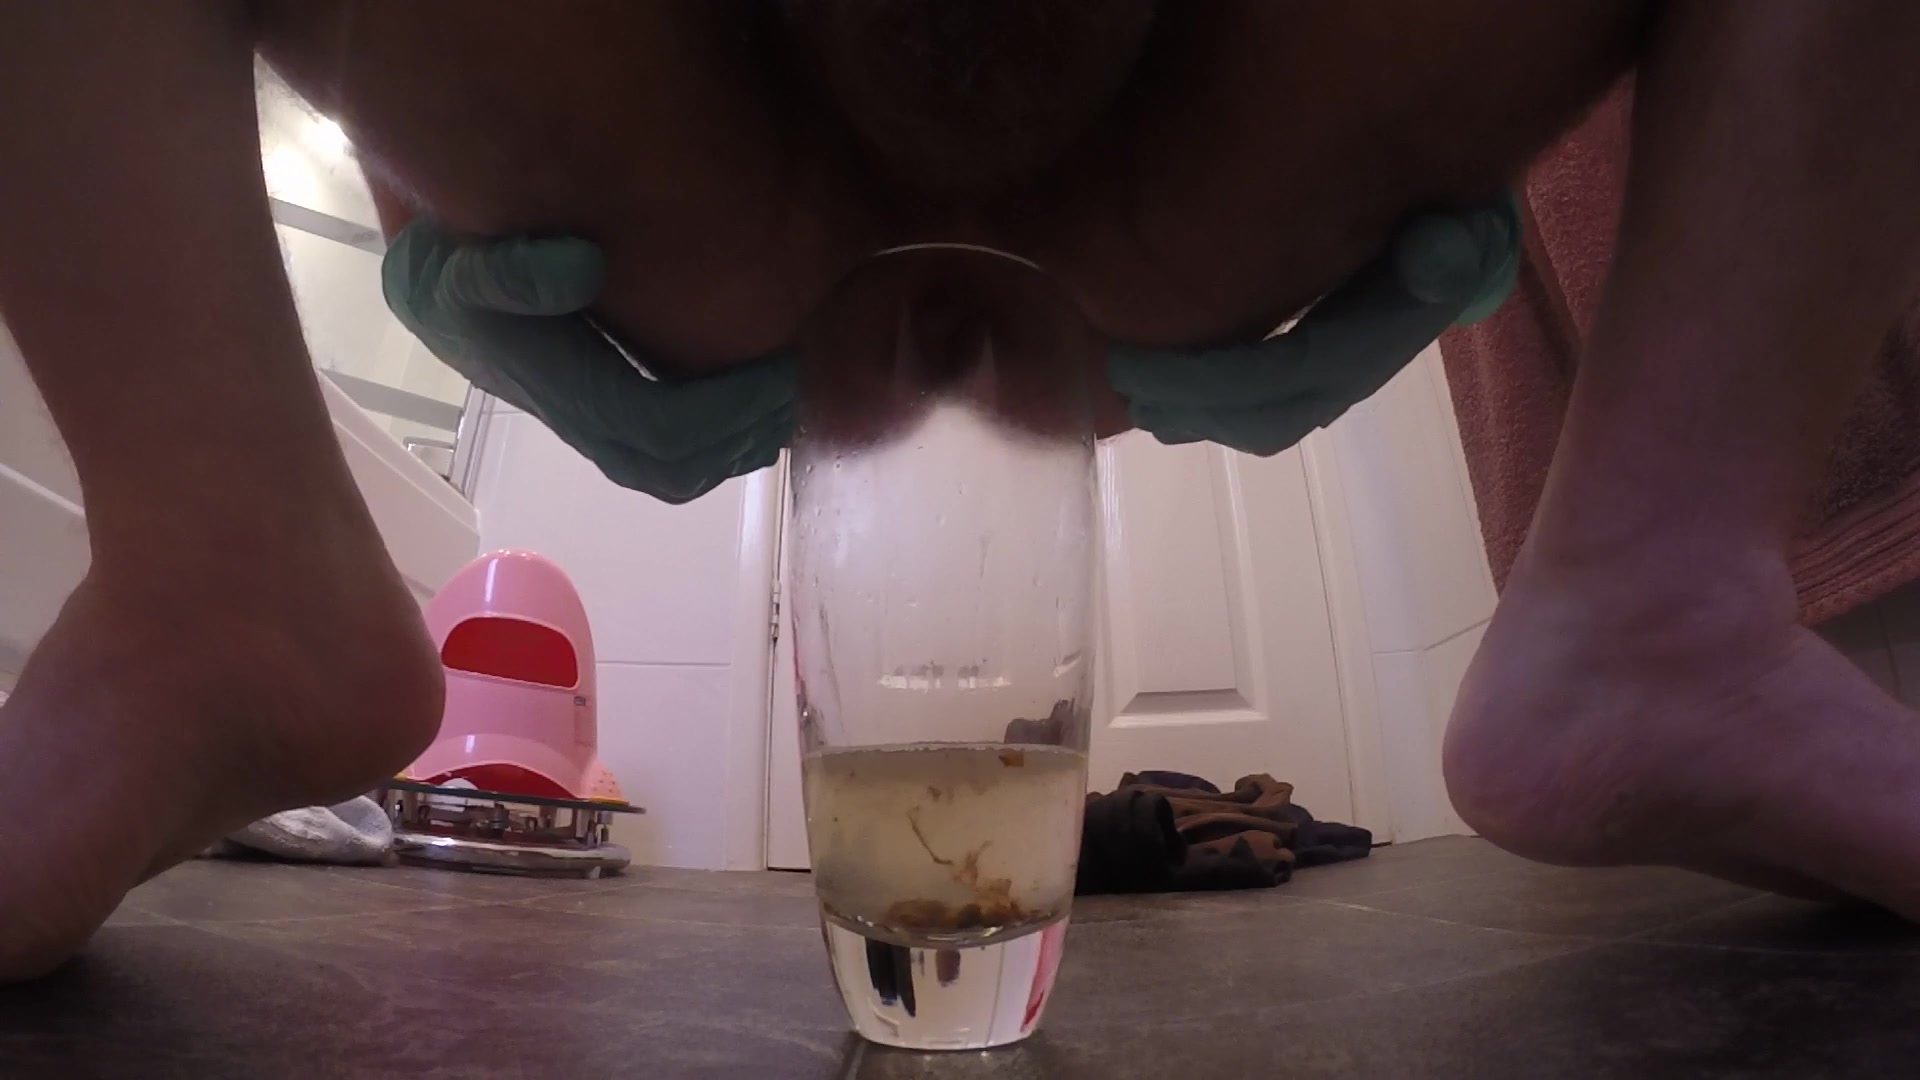 Doing an enema into a glass cup